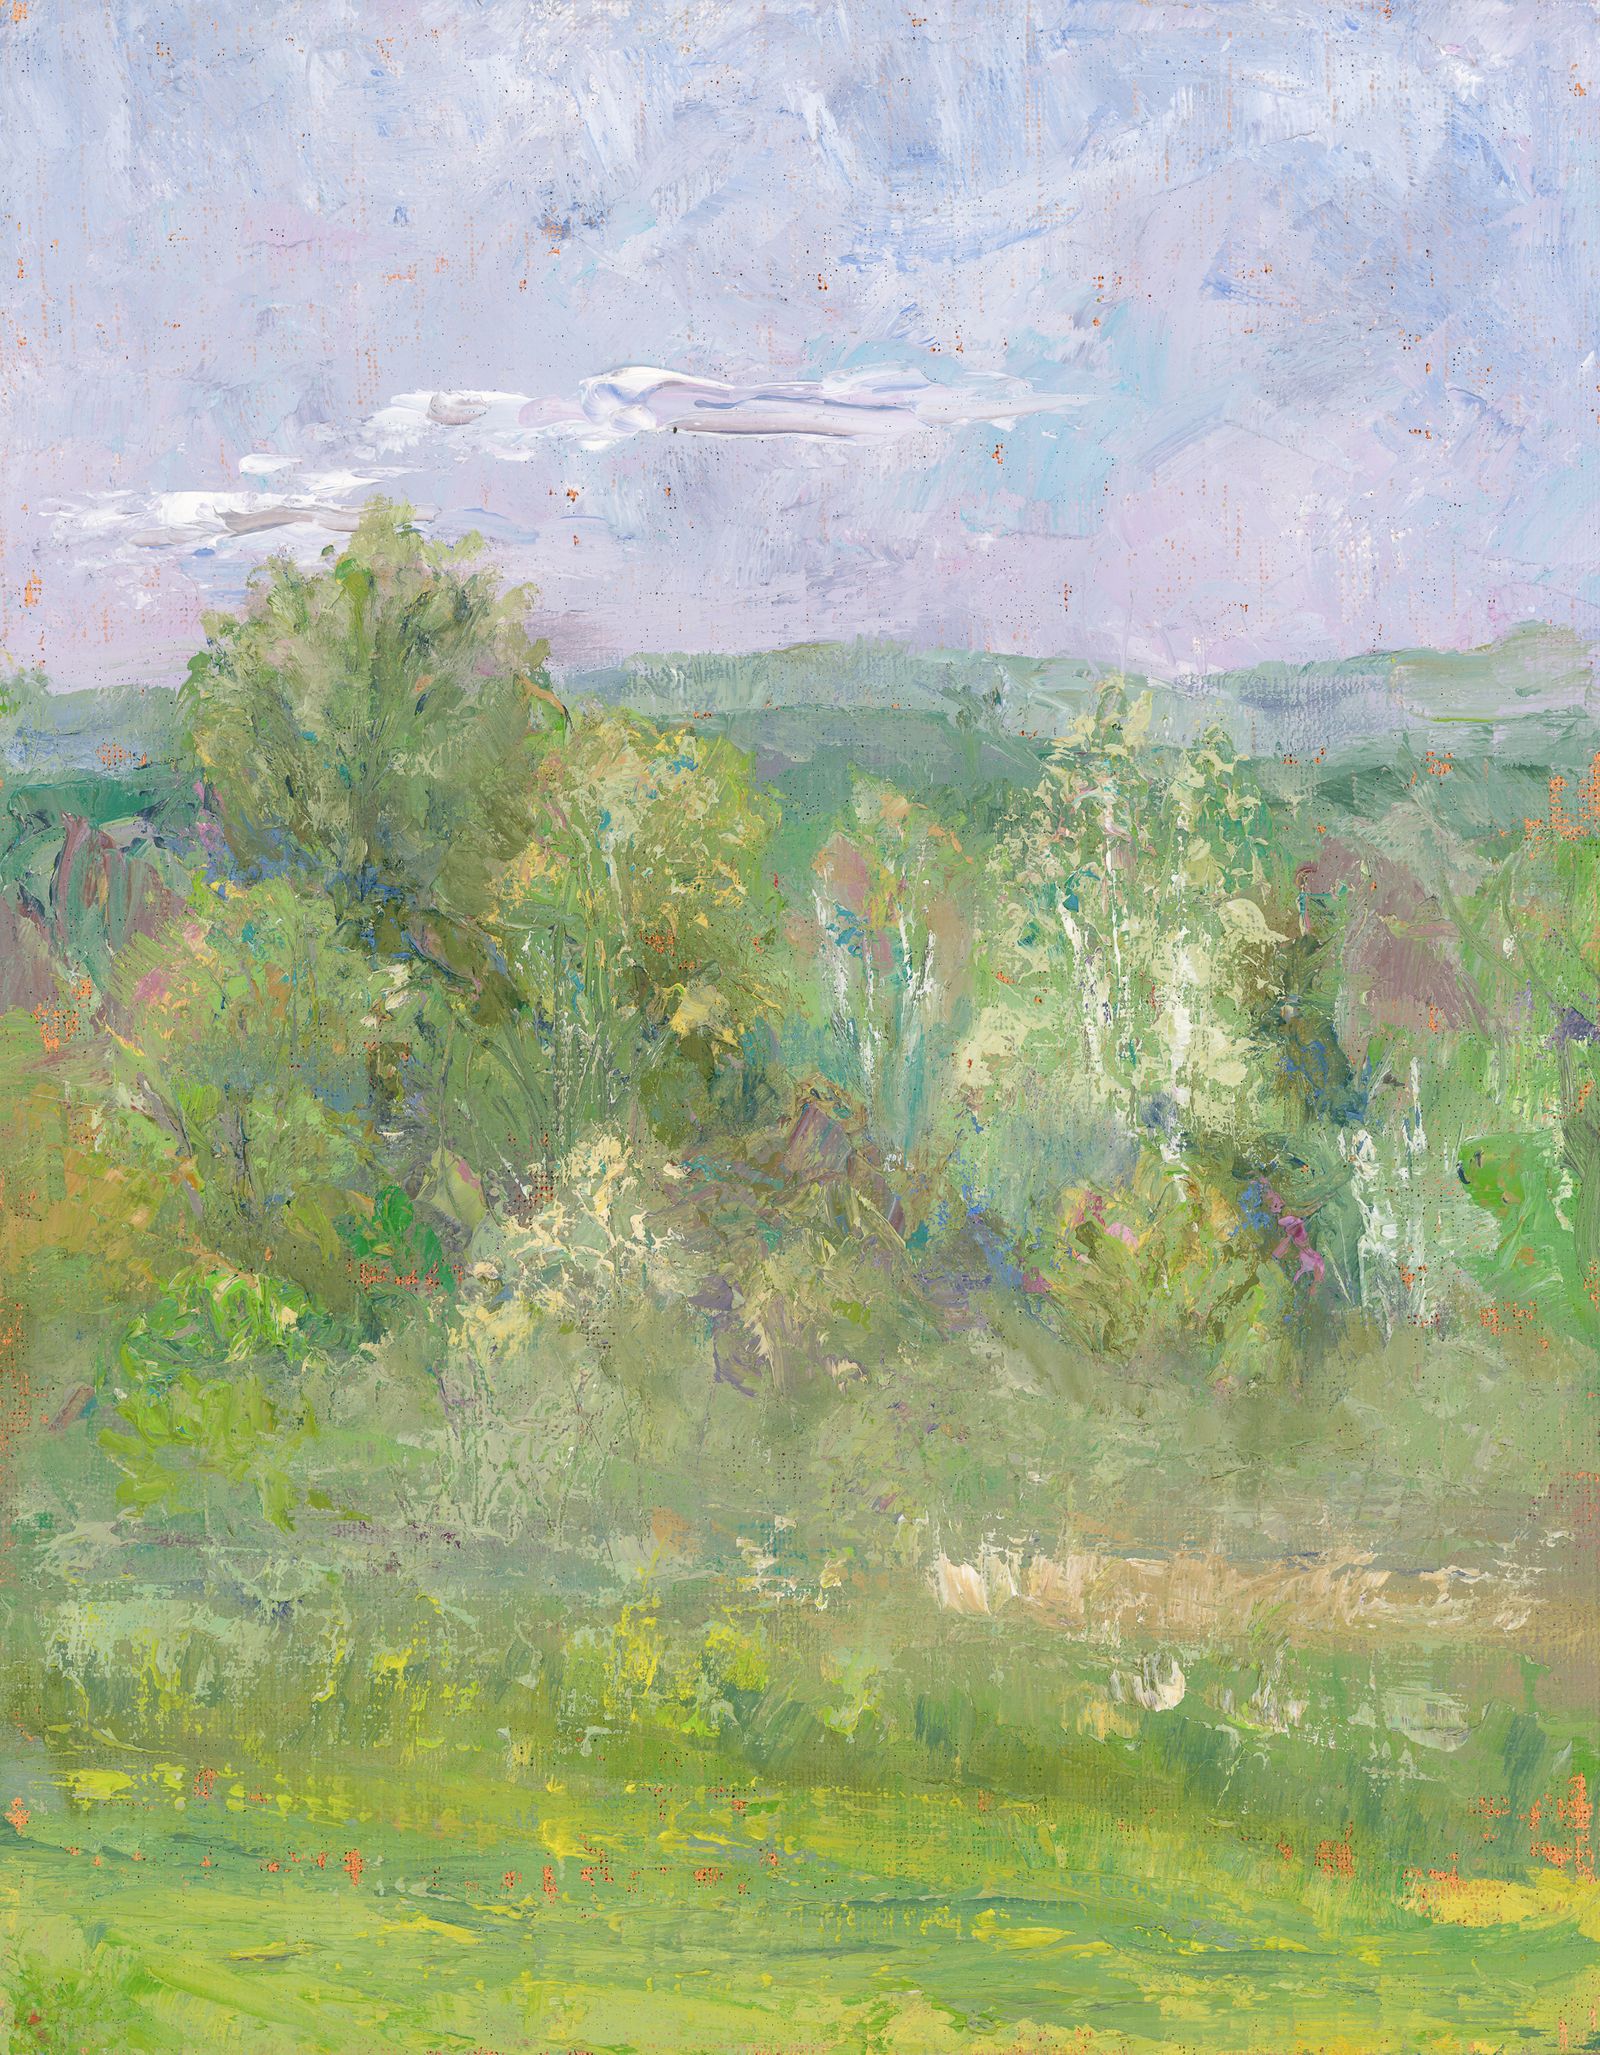 A Plein Air painting of a forest with new spring foliage. Distant hills are in the background and pink clouds are overhead.